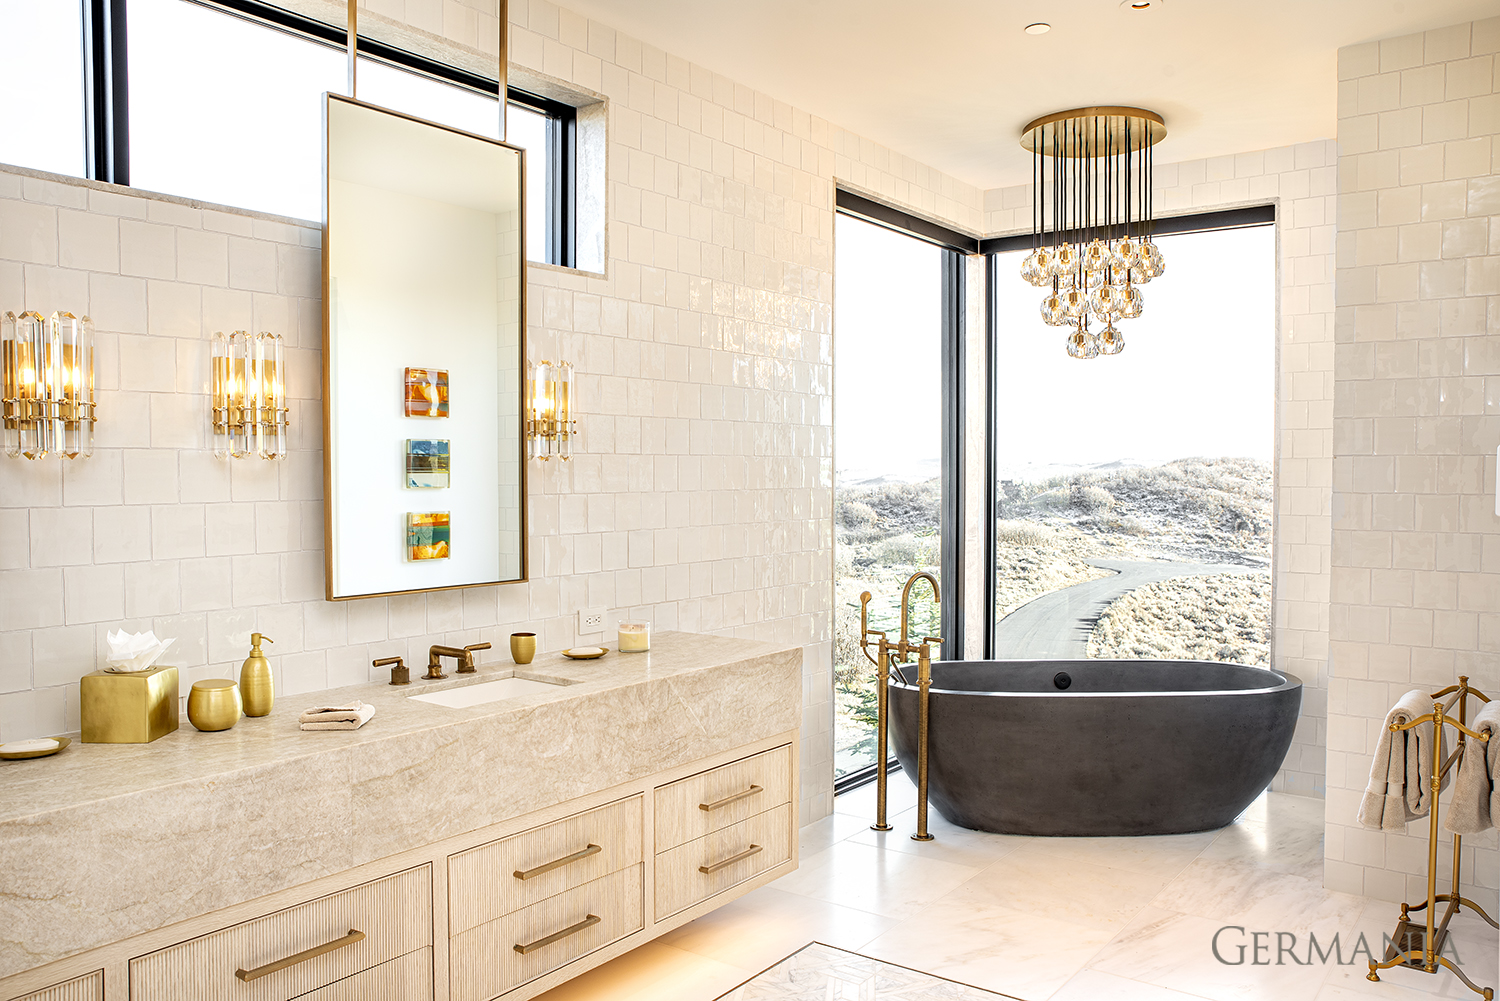 Whether you're looking to renovate or build a new house, having a luxury custom bathroom design is an important part of the overall design process. Learn about some of our favorite bathroom ideas for your custom home.